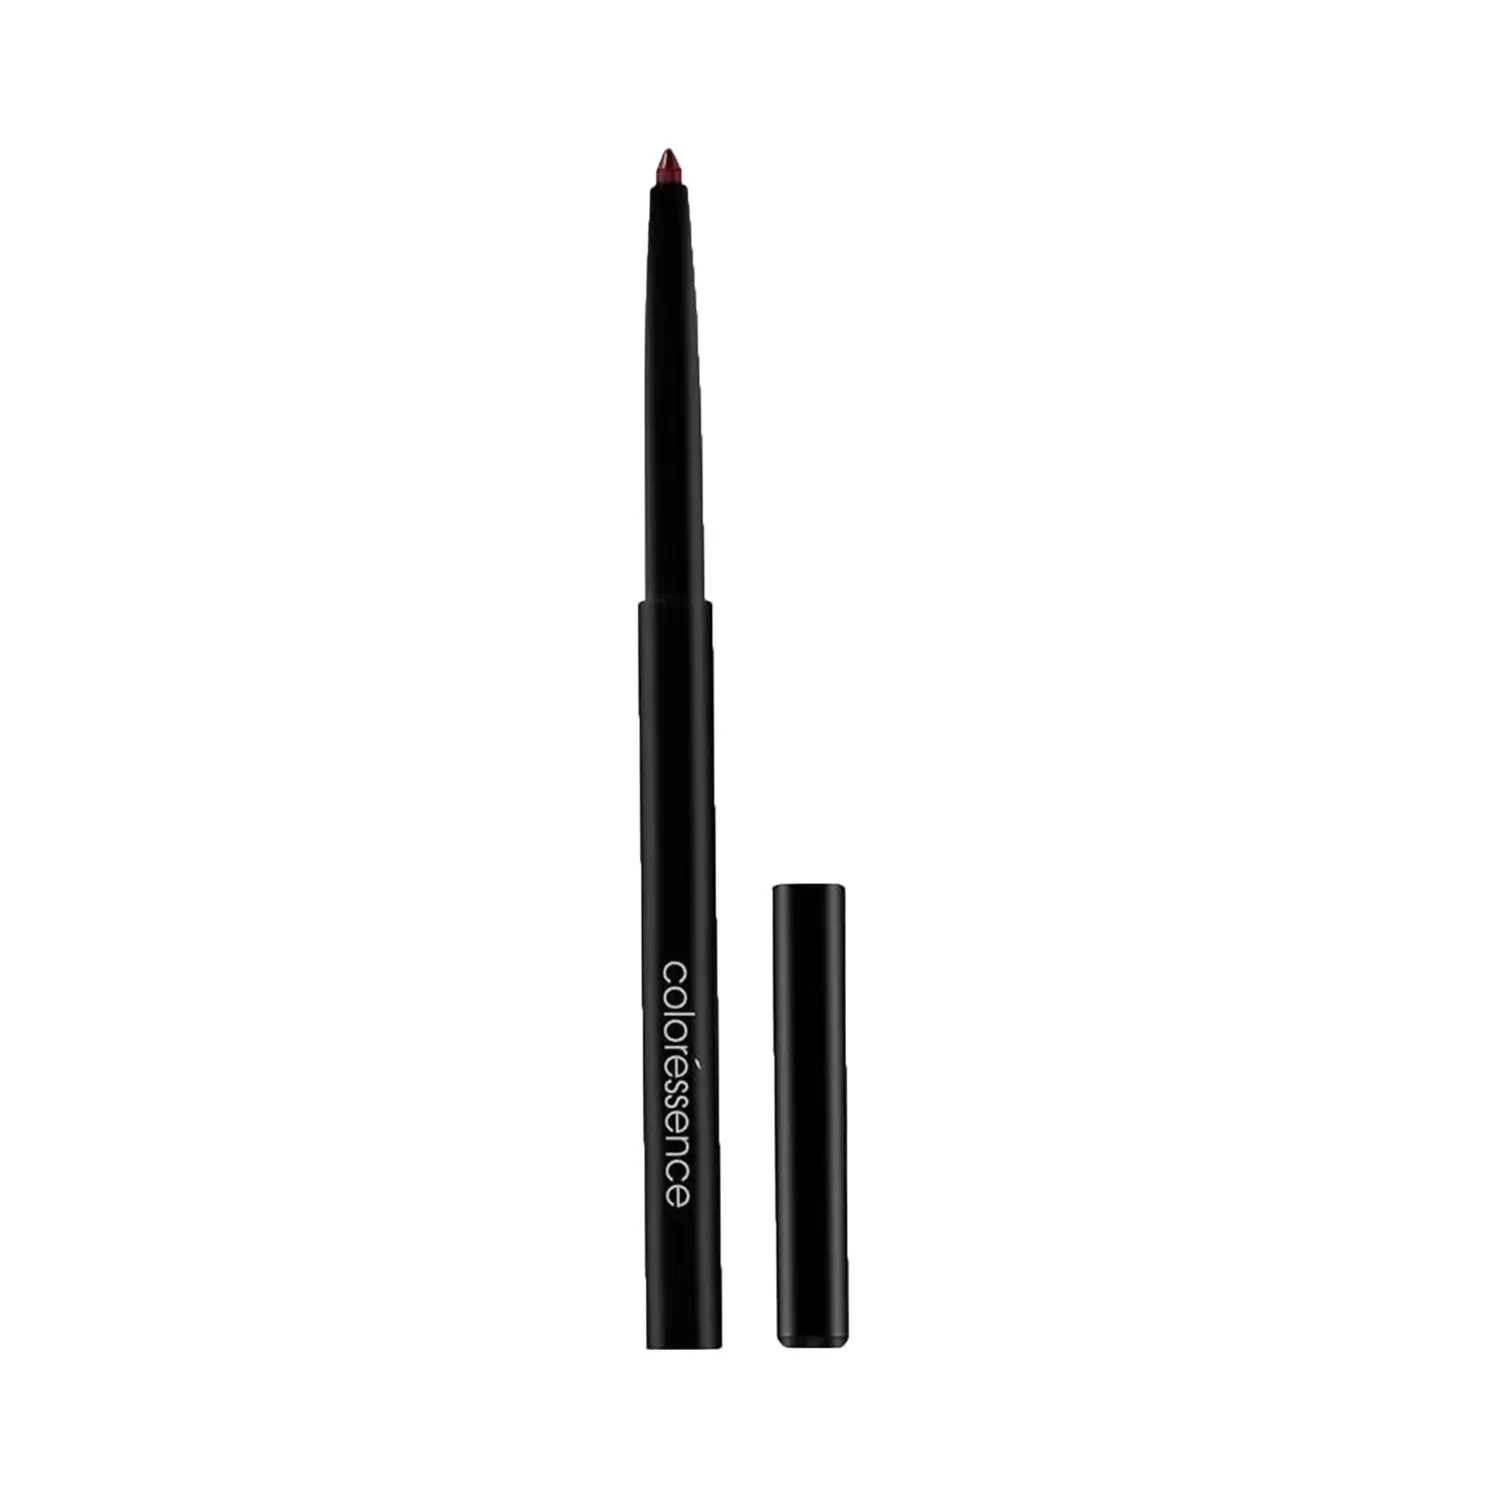 Coloressence Long Stay Opaque Finish Creamy Definer Lip Liner Pencil - Maroon (0.25g)